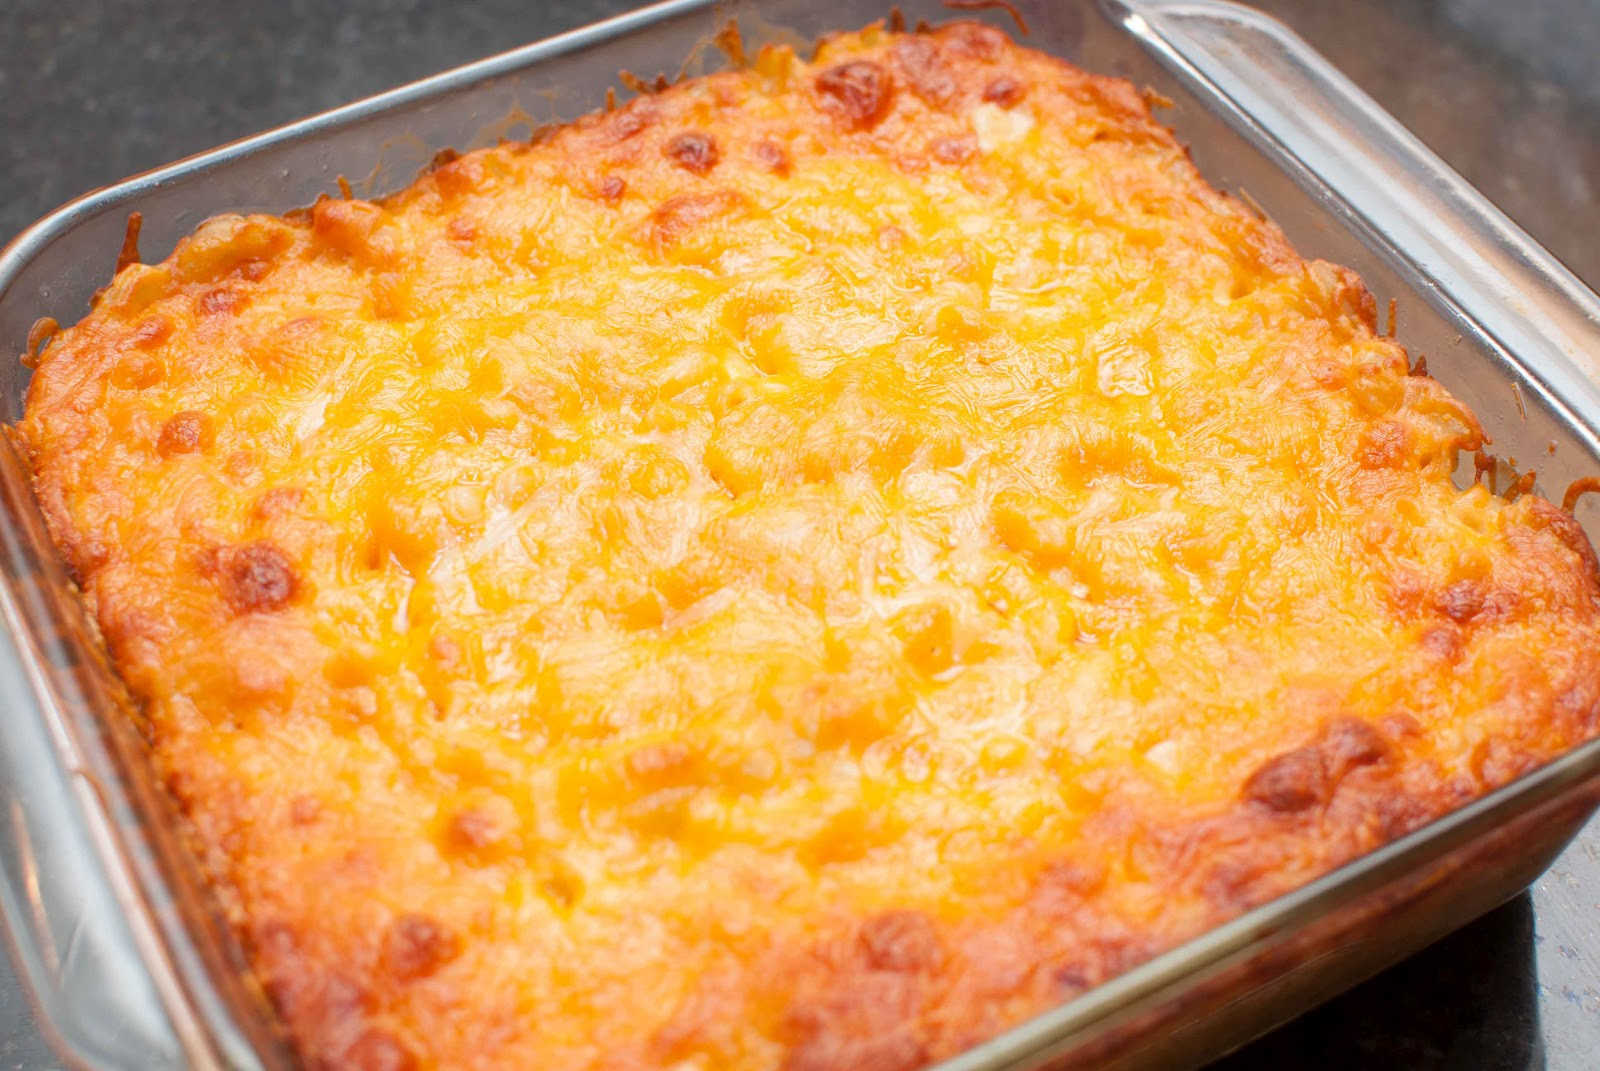 Baked Macaroni And Cheese Ingredients
 Best Foods to Serve At a Kids Party